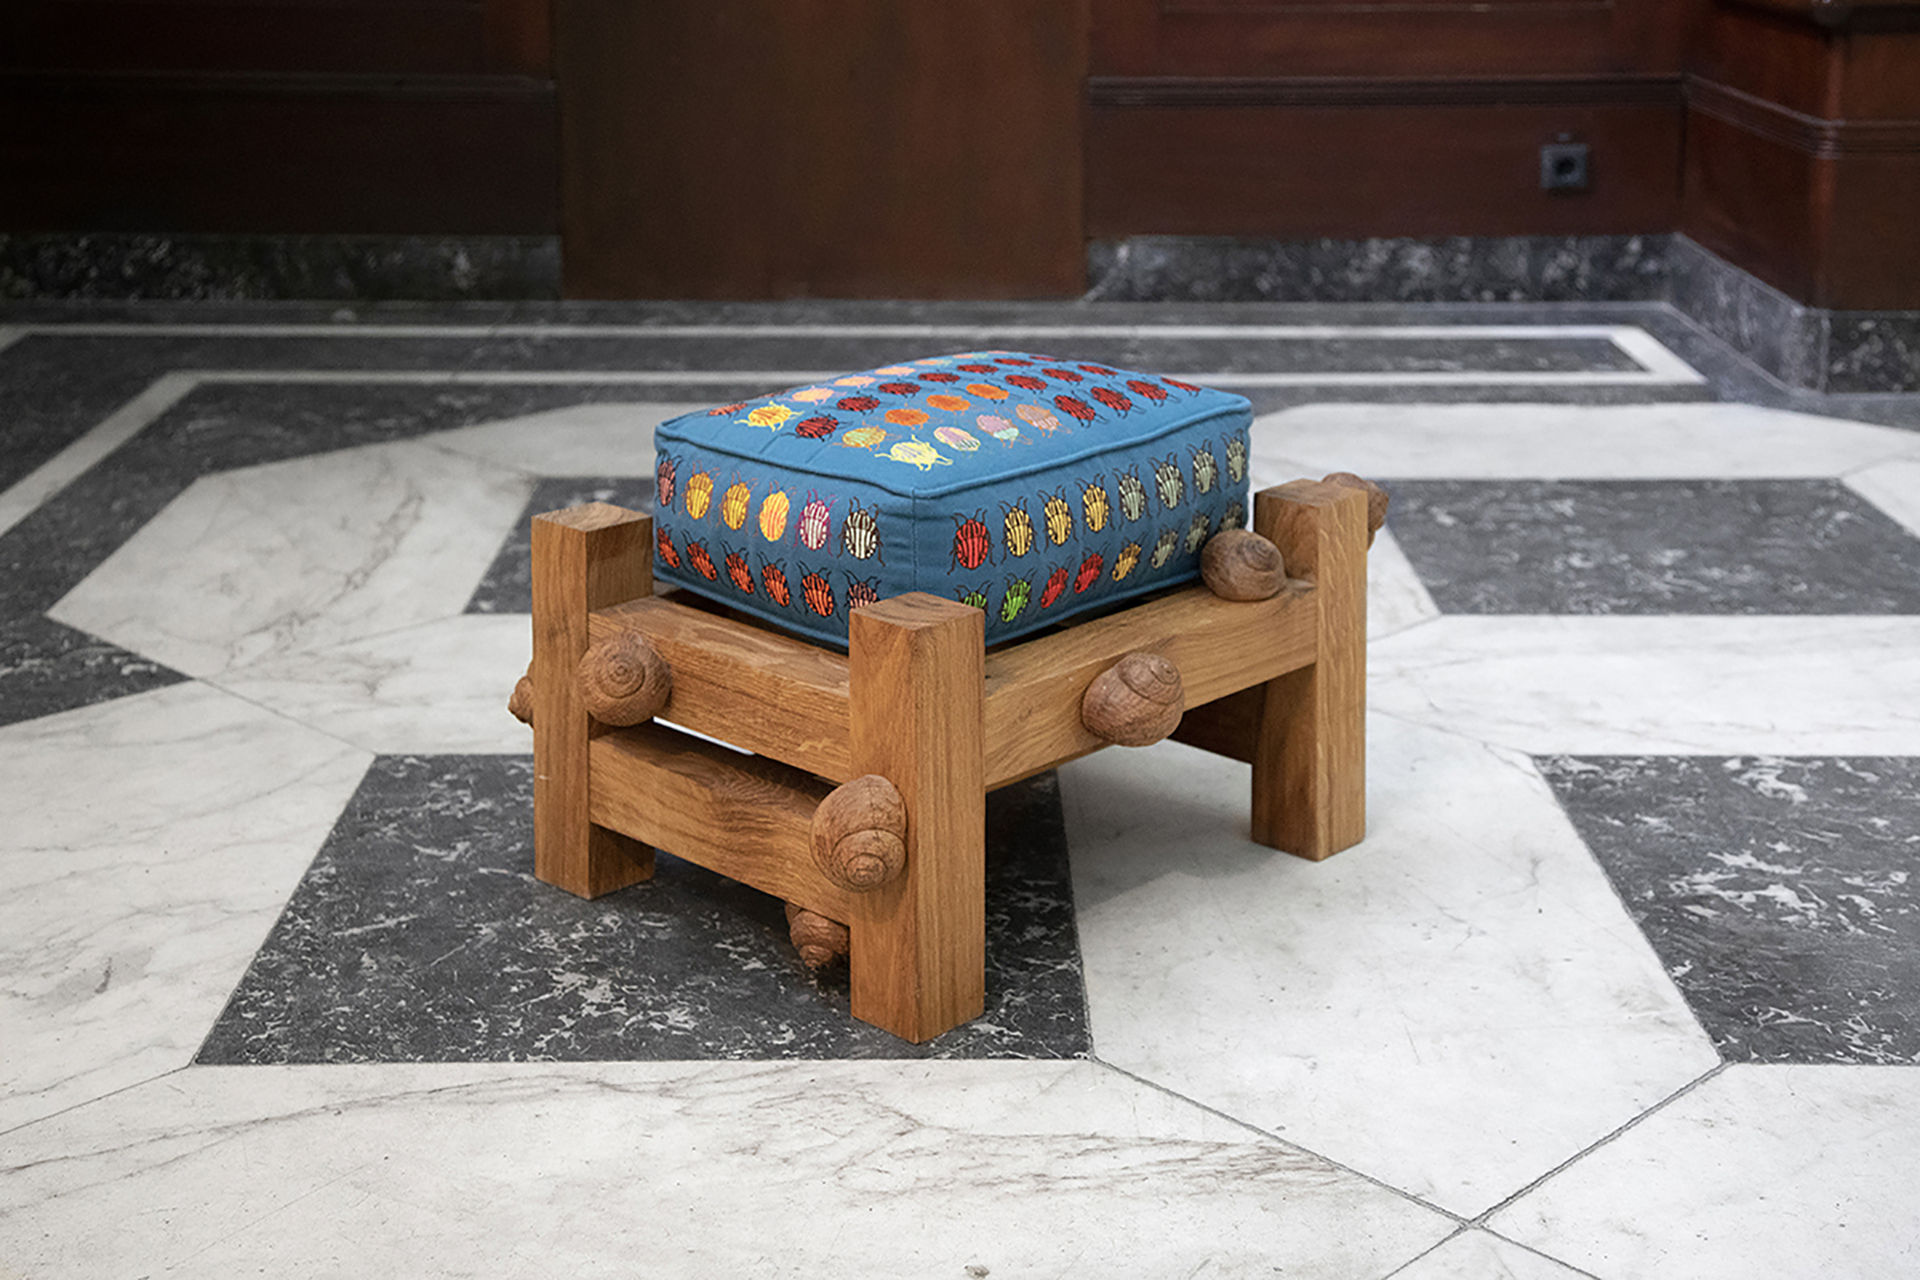 Daniel Dewar &amp; Grégory Gicquel, Oak bench with striped shield bugs and snails, 2021, oak wood and embroidery on cushion, 41 x 66 x 56 cm